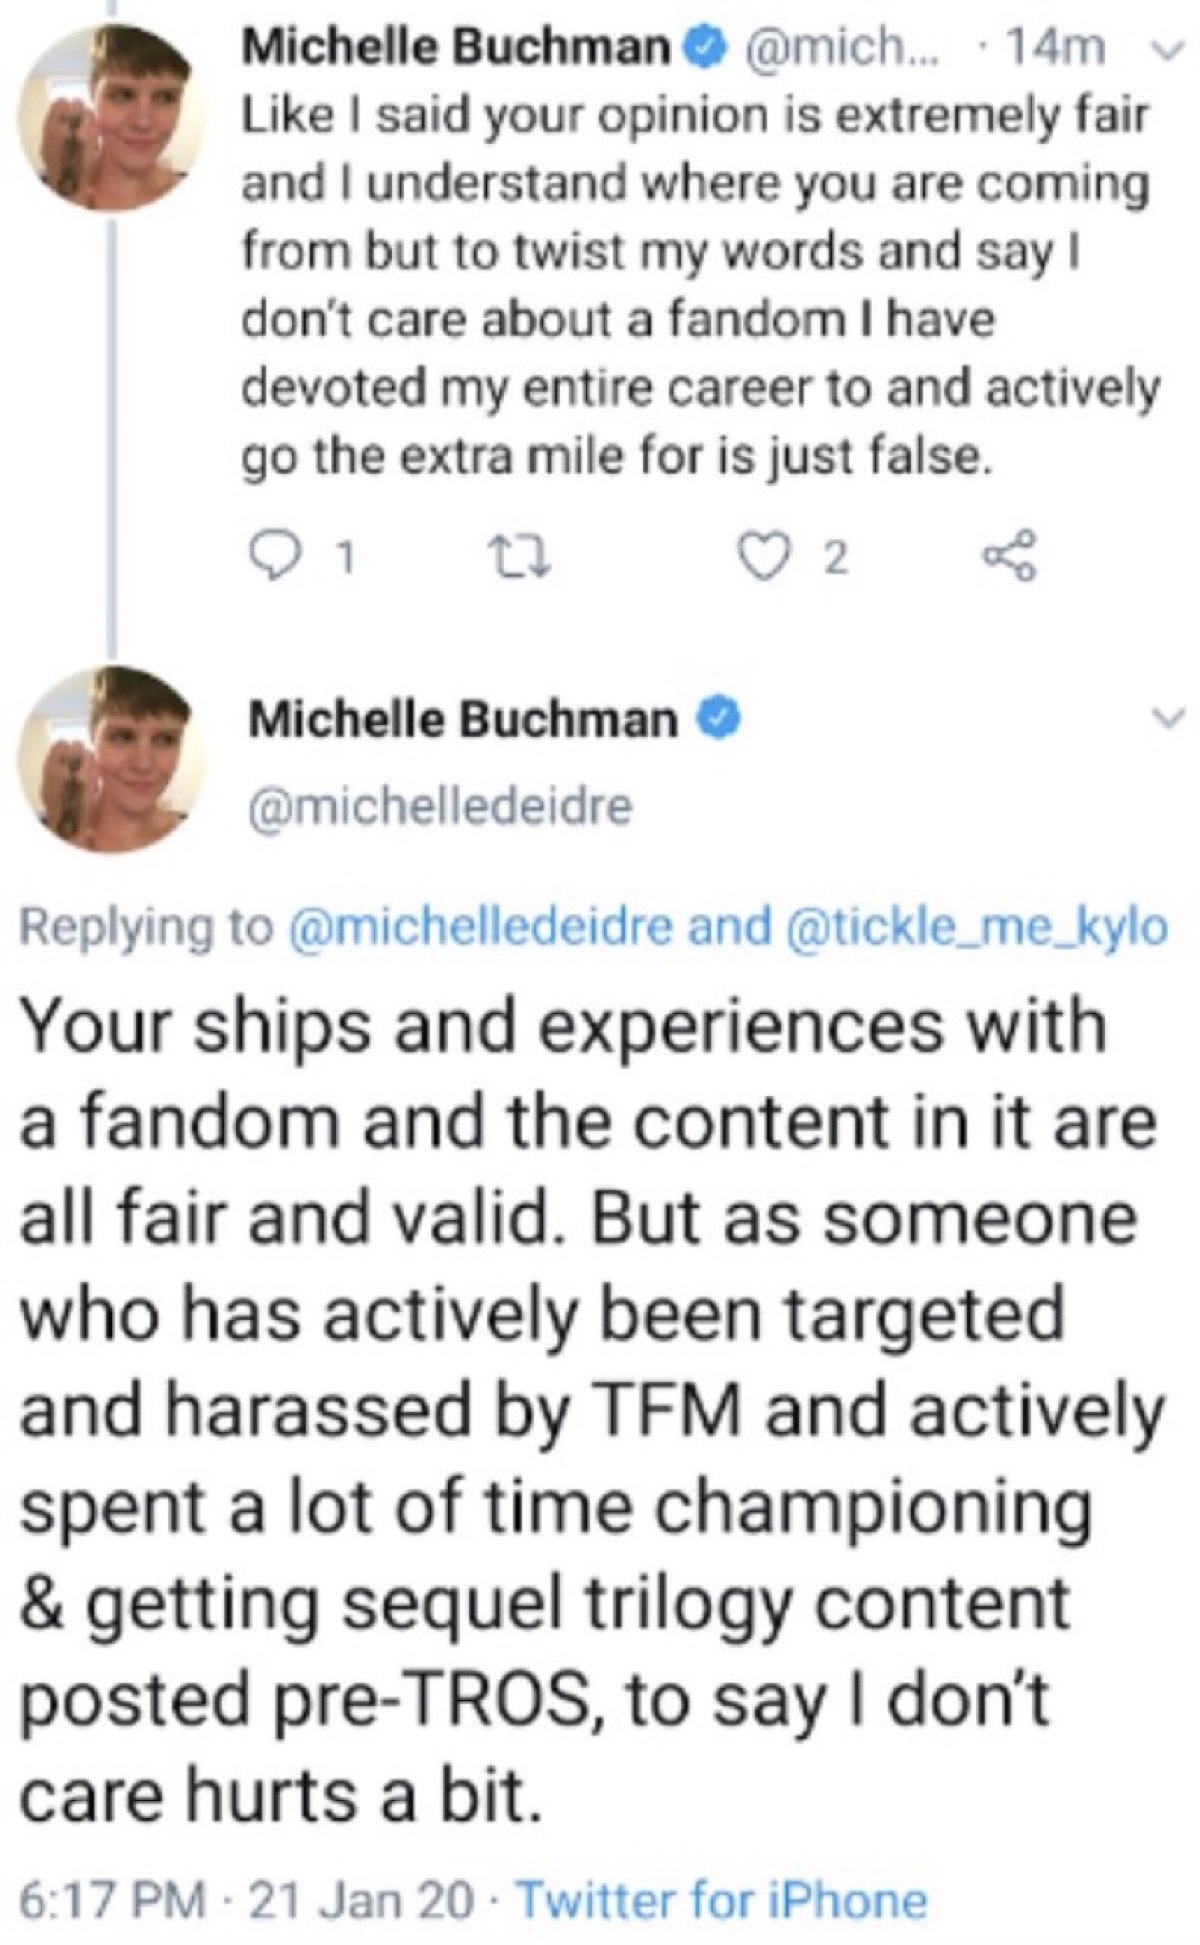 Buchman said the Reylos accusations that she doesn’t care were hurtful (Twitter - @saltandrockets)